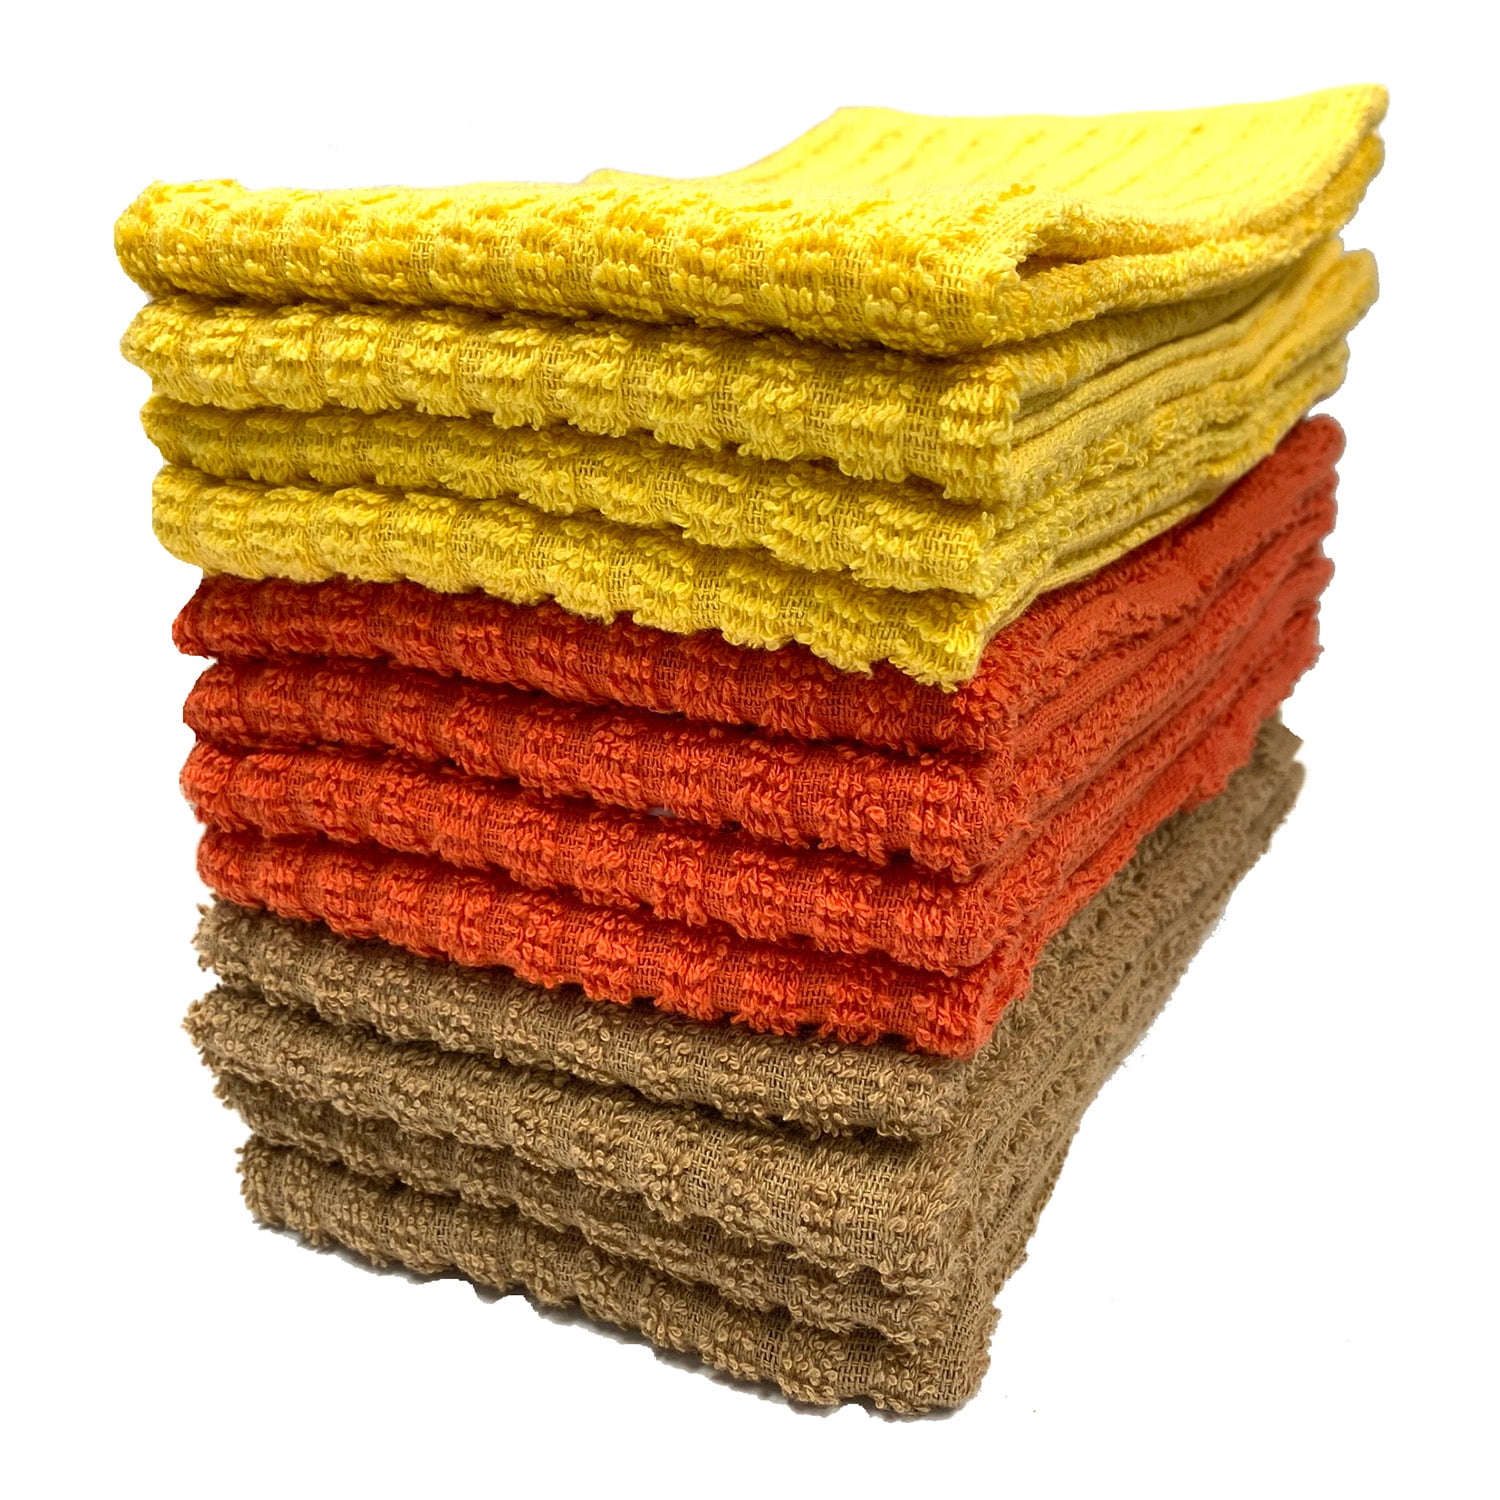 Bar Towels – Bar Mop Cleaning Kitchen Towels (12 Pack, 16″ x 19